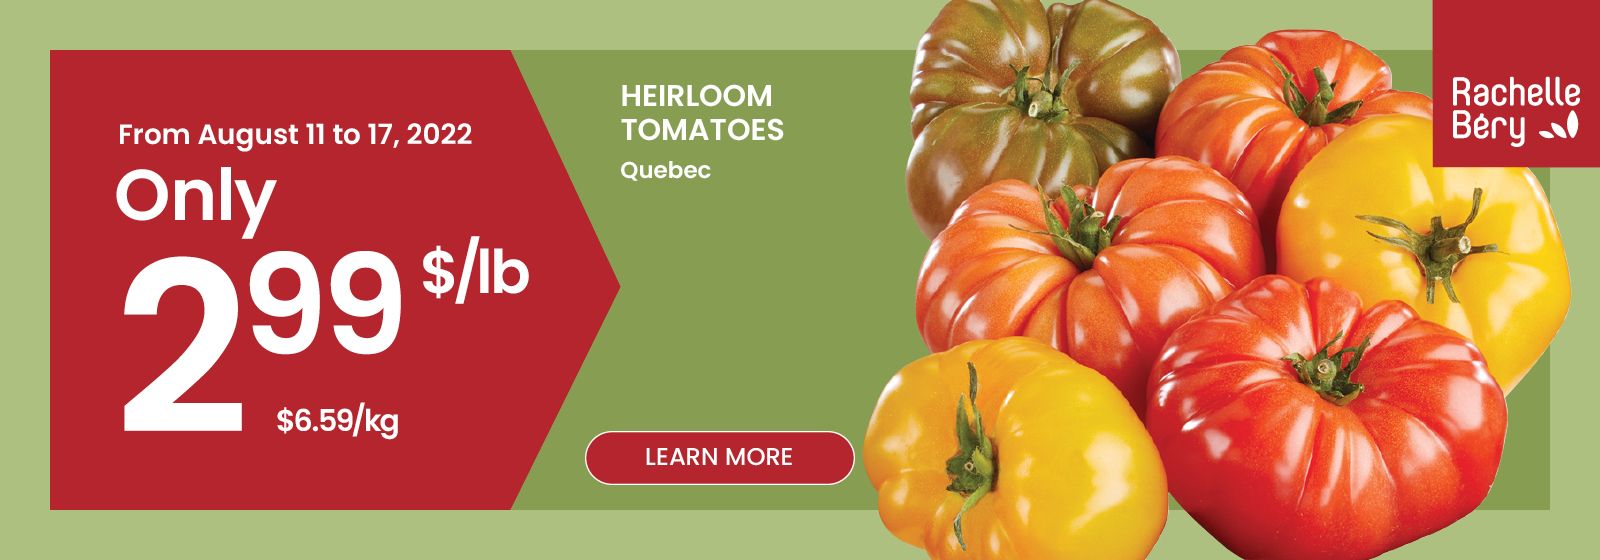 Text Reading 'Buy Heirloom Tomatoes from Quebec for only $2.99 per lb from August 11, 2022 to August 17, 2022. 'Learn More' button here.'